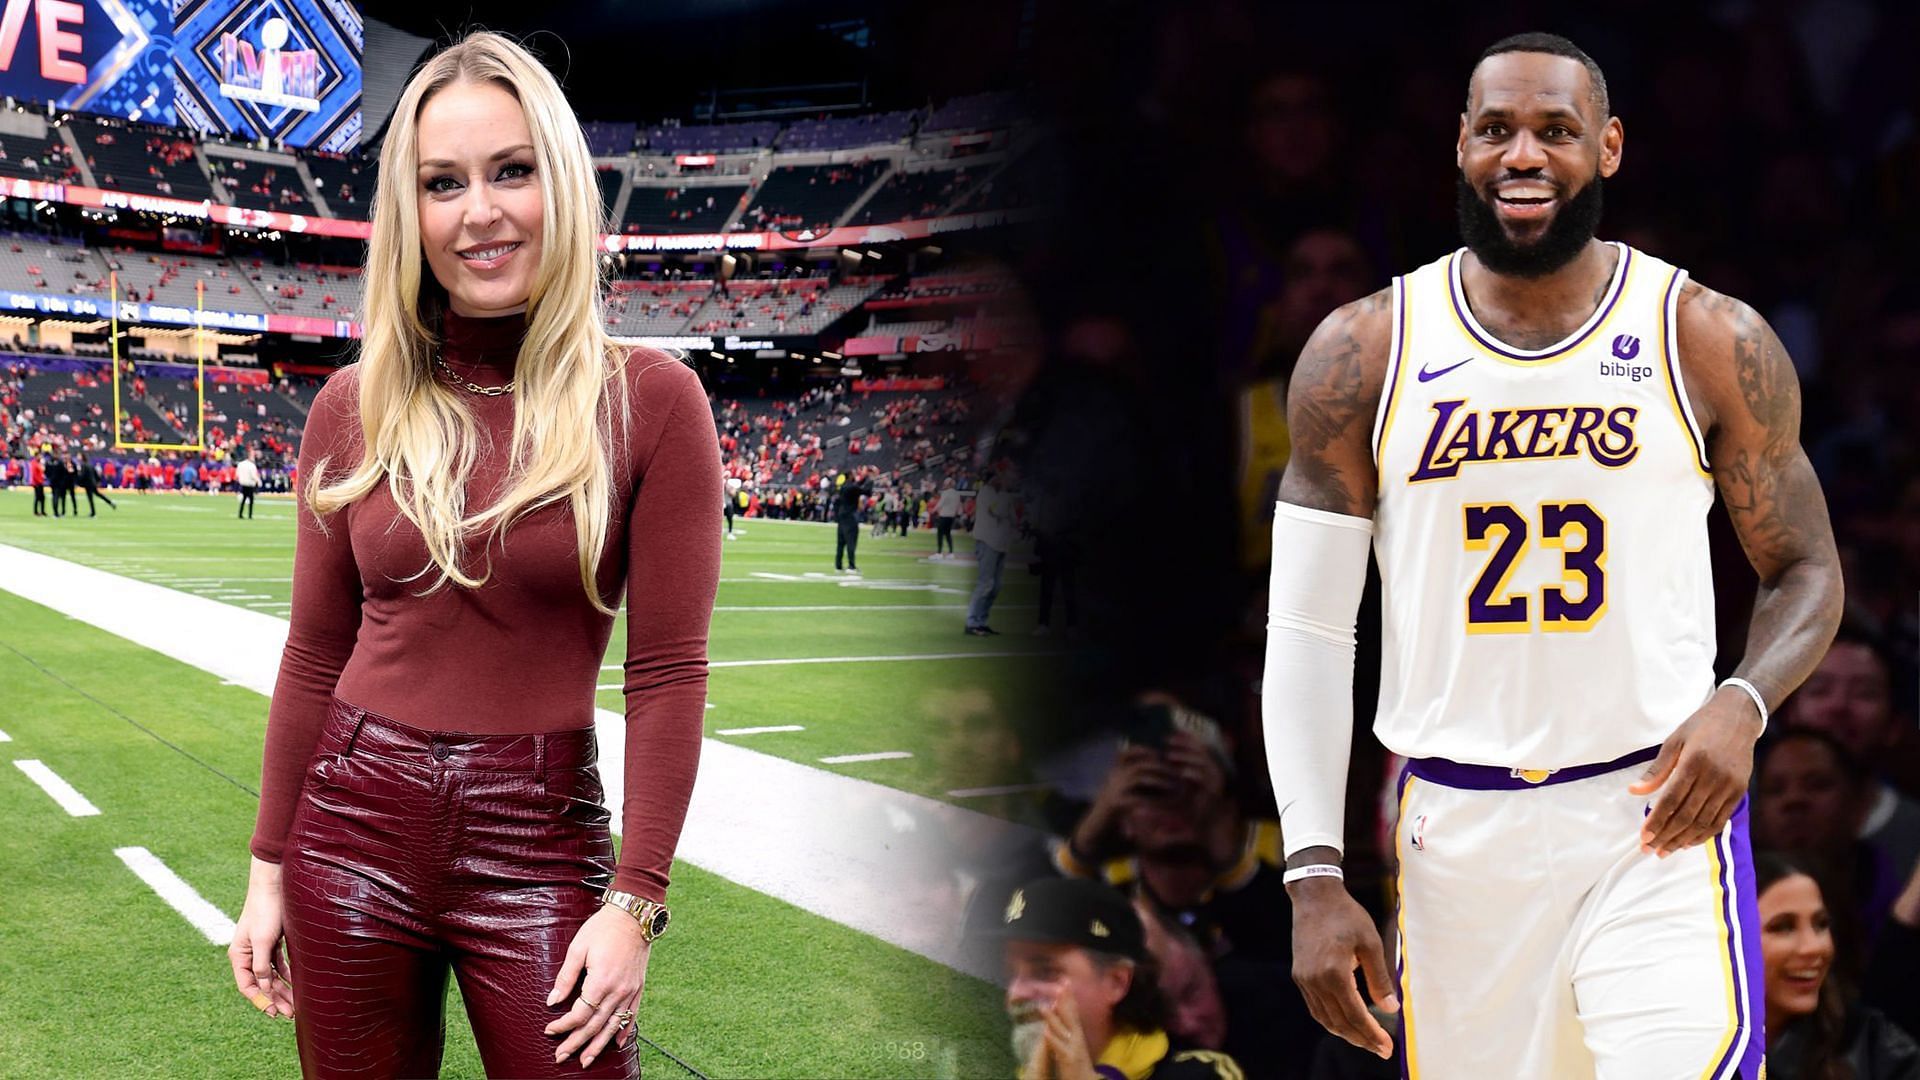 Lindsey Vonn congratulated LeBron James for making history in NBA with 40,000 points.